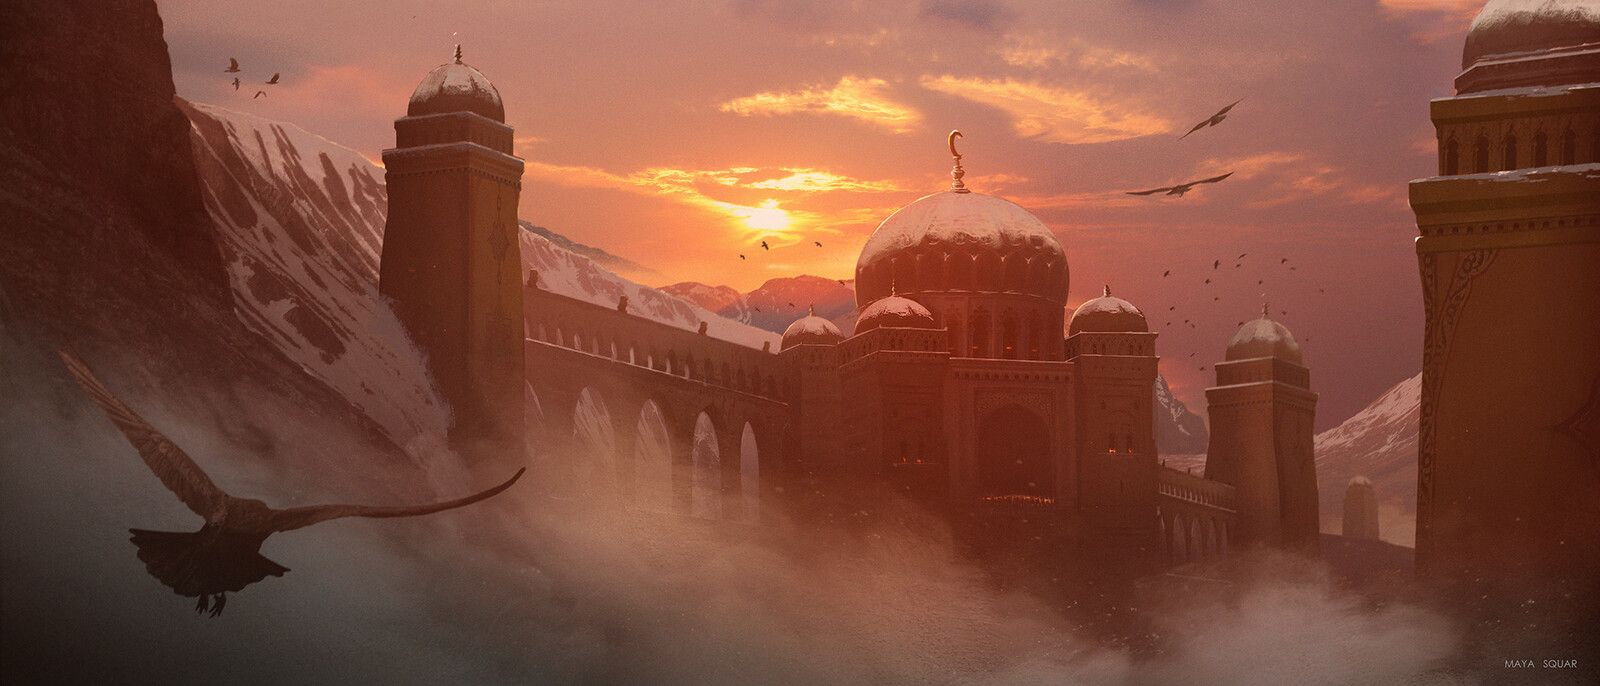 Snow Mosque at Dusk